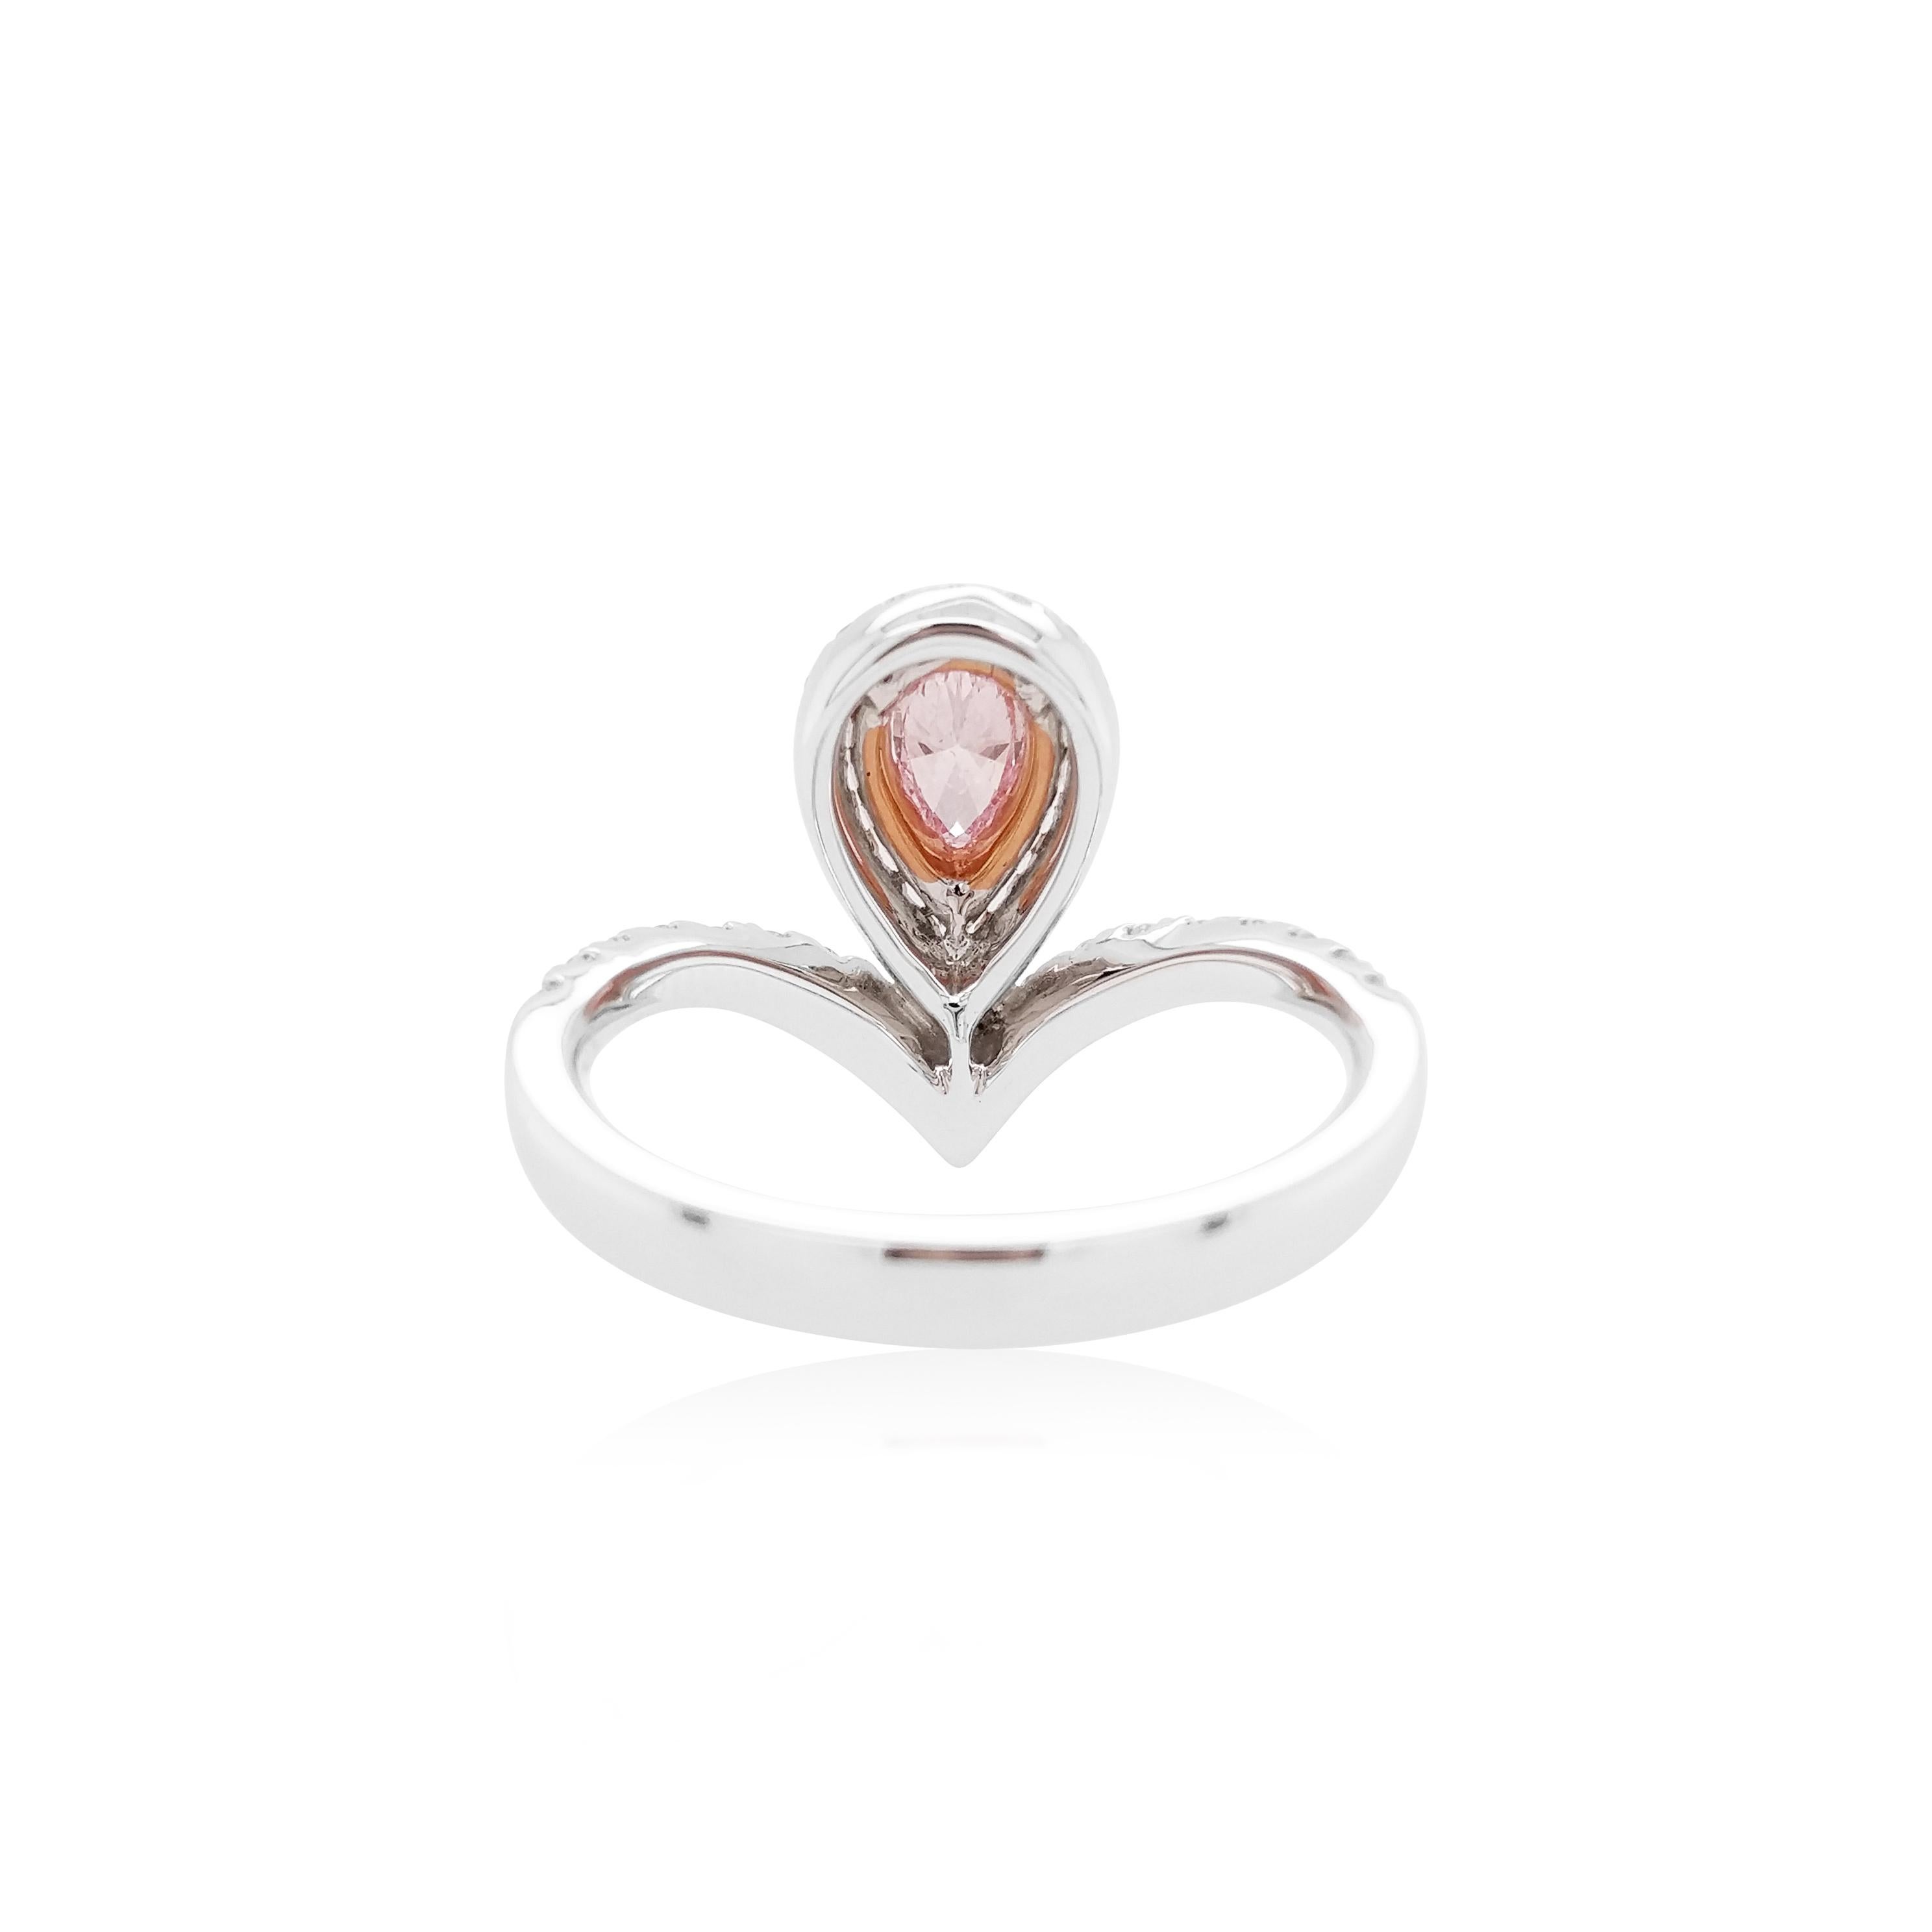 This stunning ring features an exceptional quality Pear-shape Argyle Pink diamond (Twins-certification, Argyle and GIA certified) at the heart of the design, surrounded by halos of scintillating Argyle pink diamonds and white diamonds. Bold and